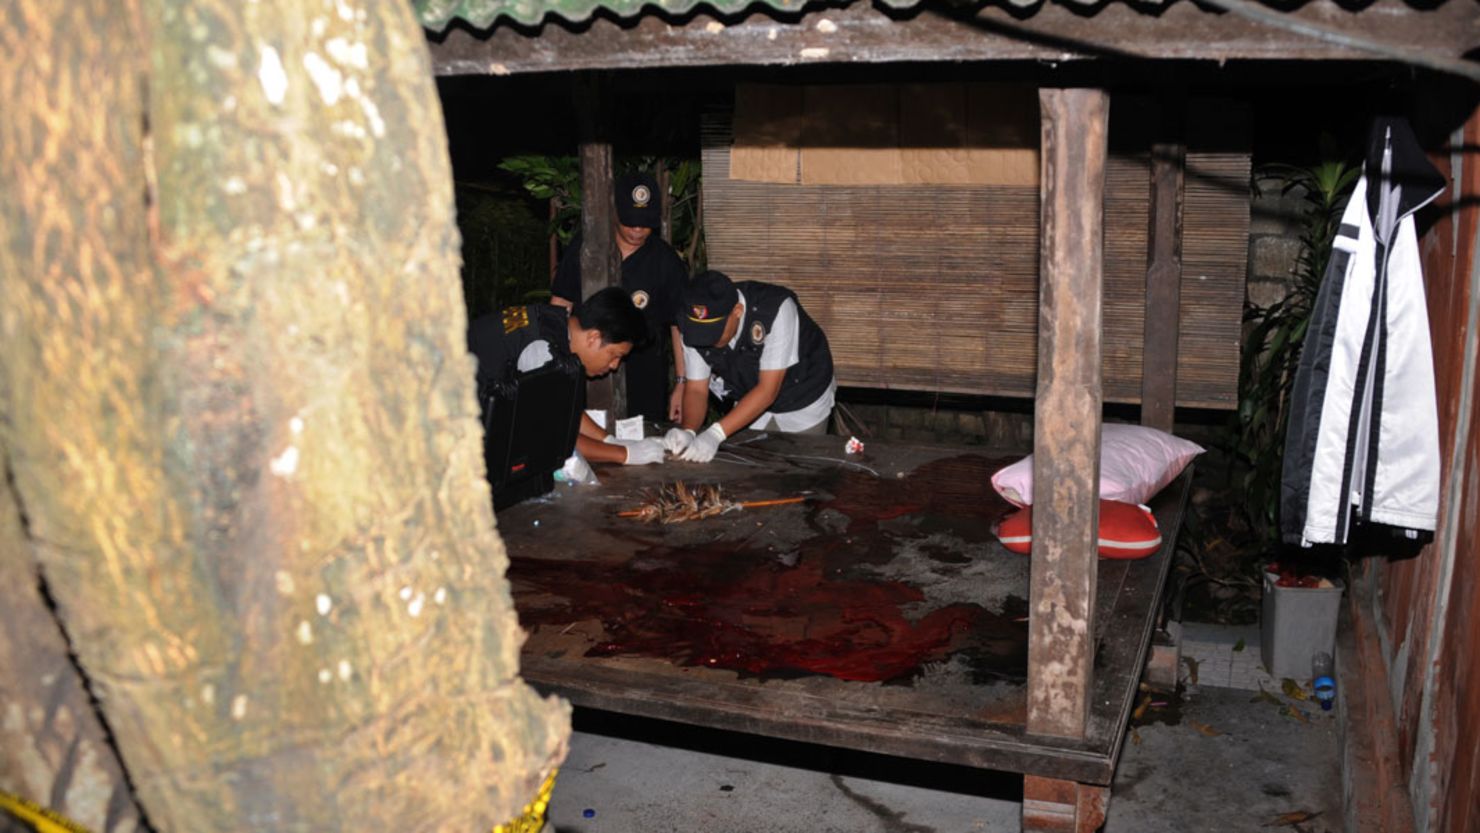 Indonesian counter-terrorism police personnel look for clues at a bungalow after the shoot-out on the island of Bali.